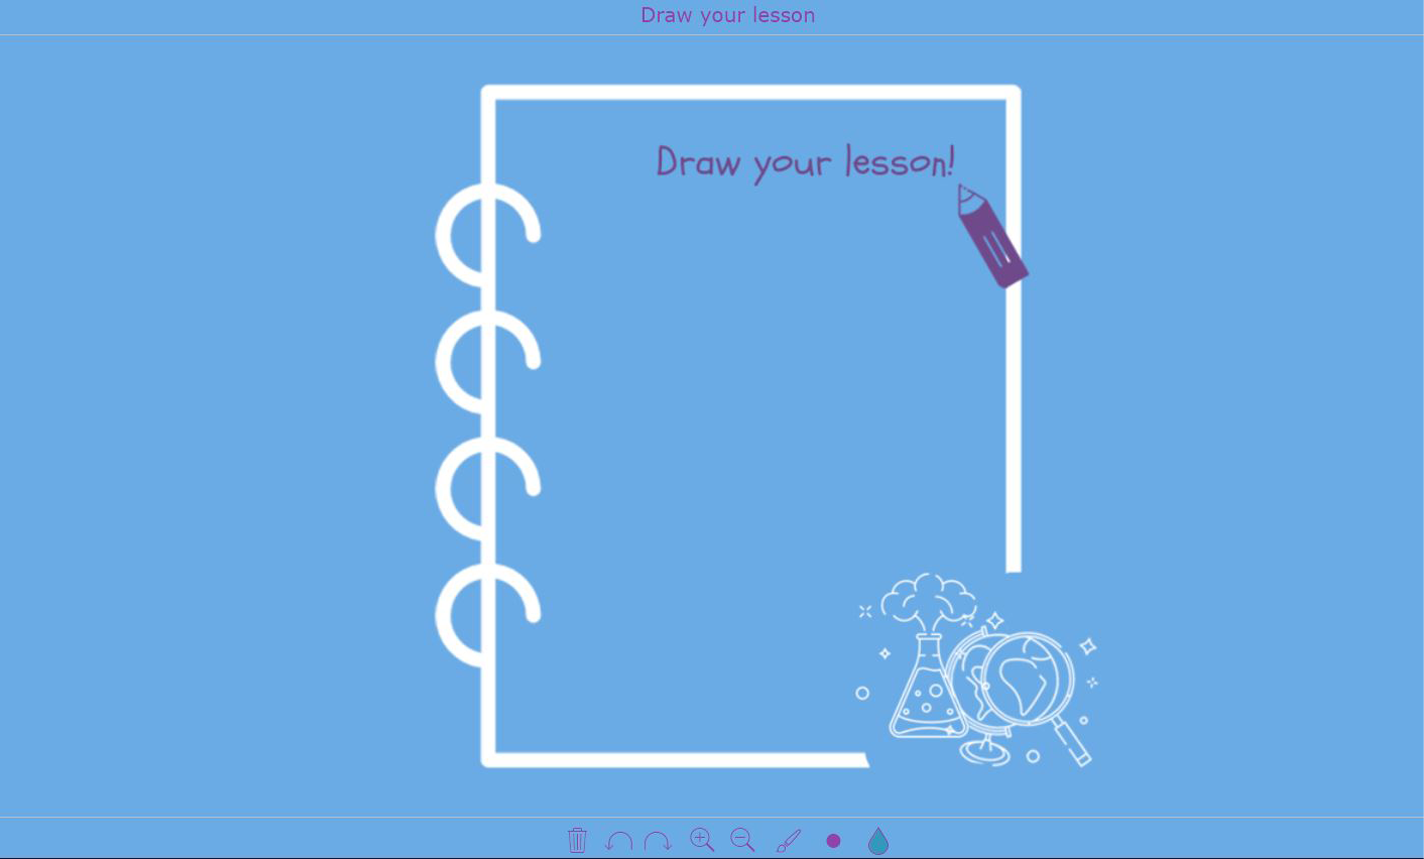 digital exit ticket - Draw your lesson